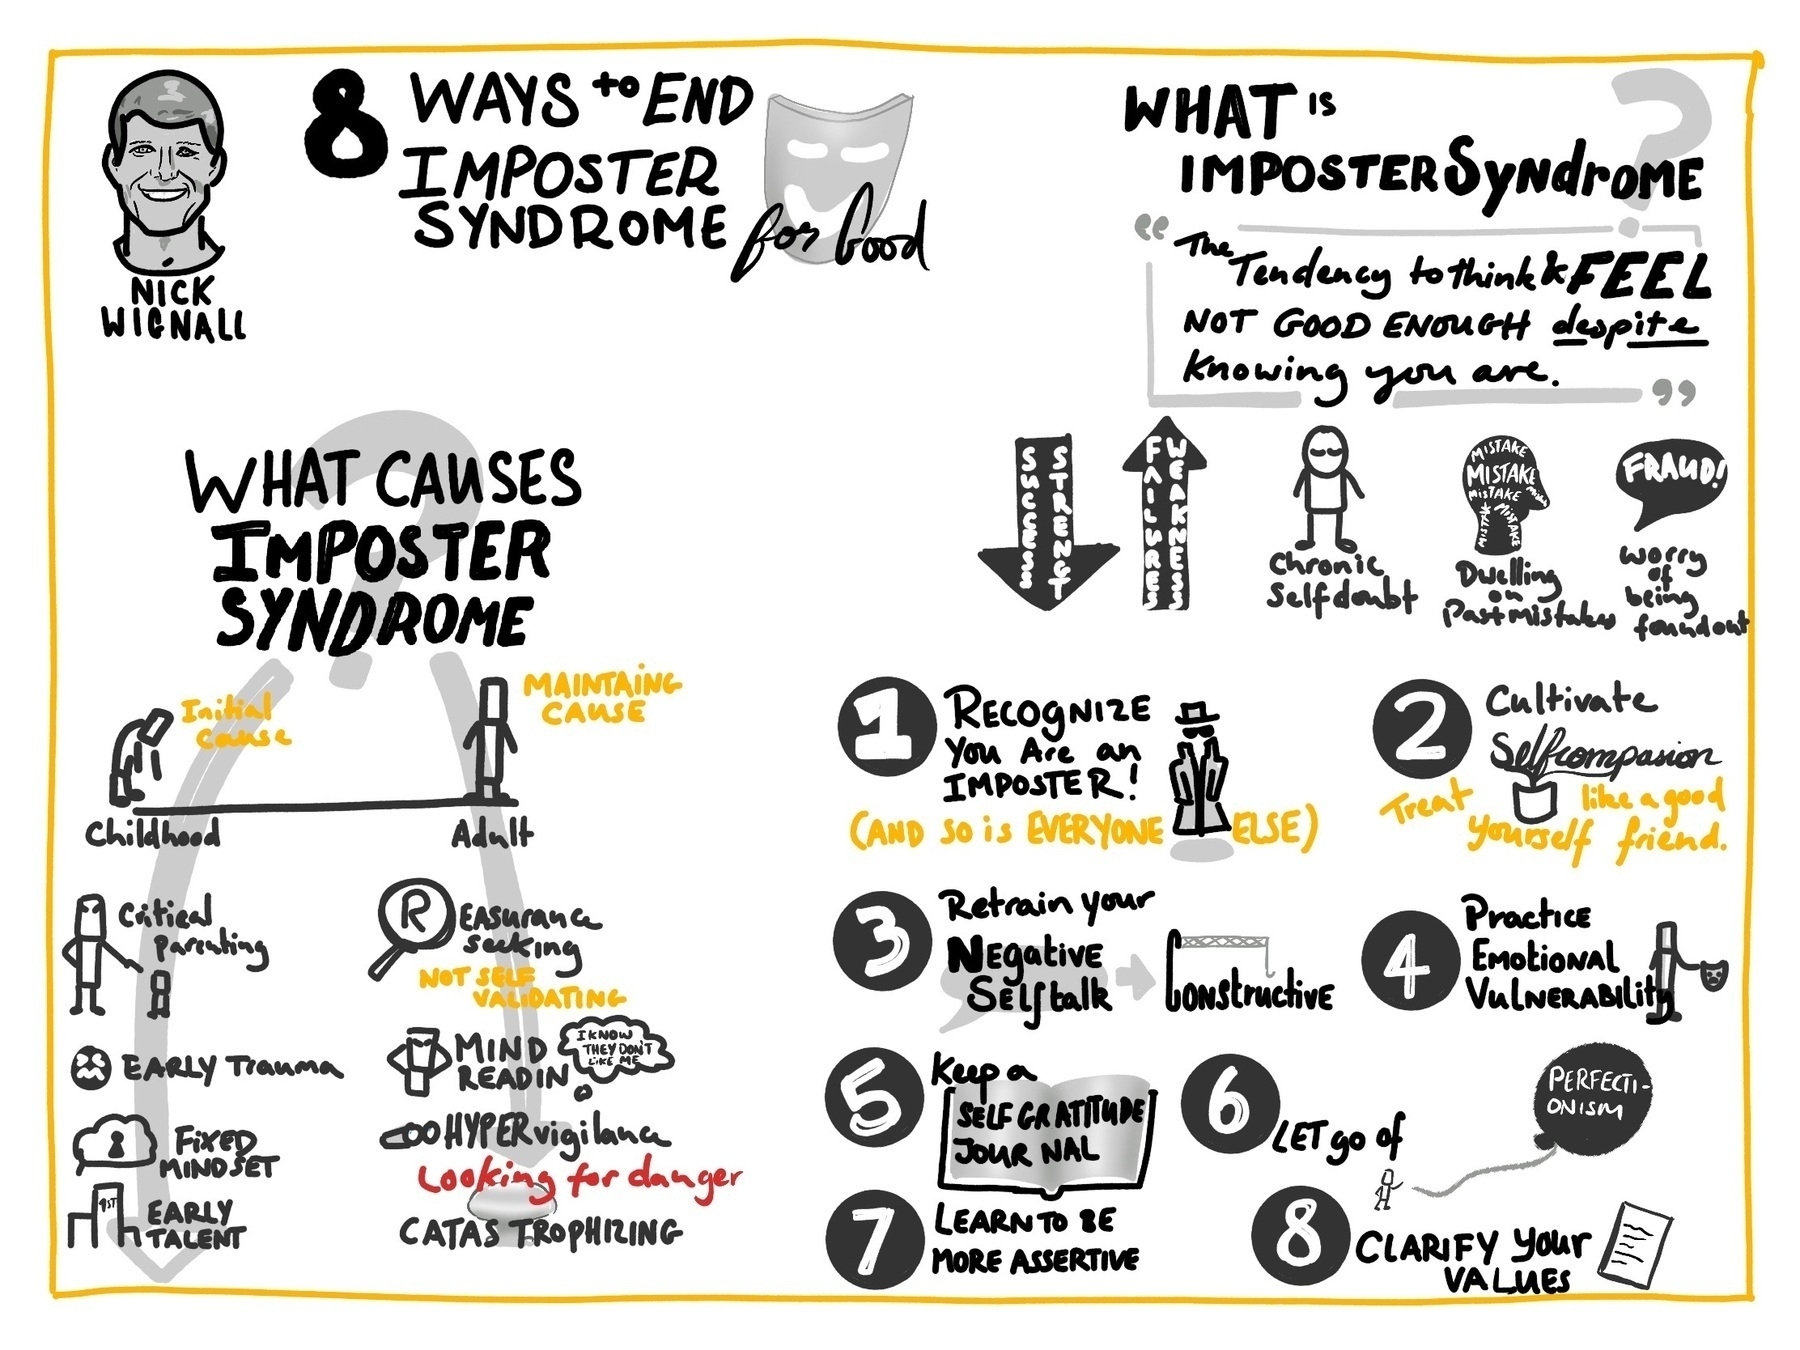 A sketchnote of Nick Wignall’s article 8 Ways to end imposter syndrome for good. 